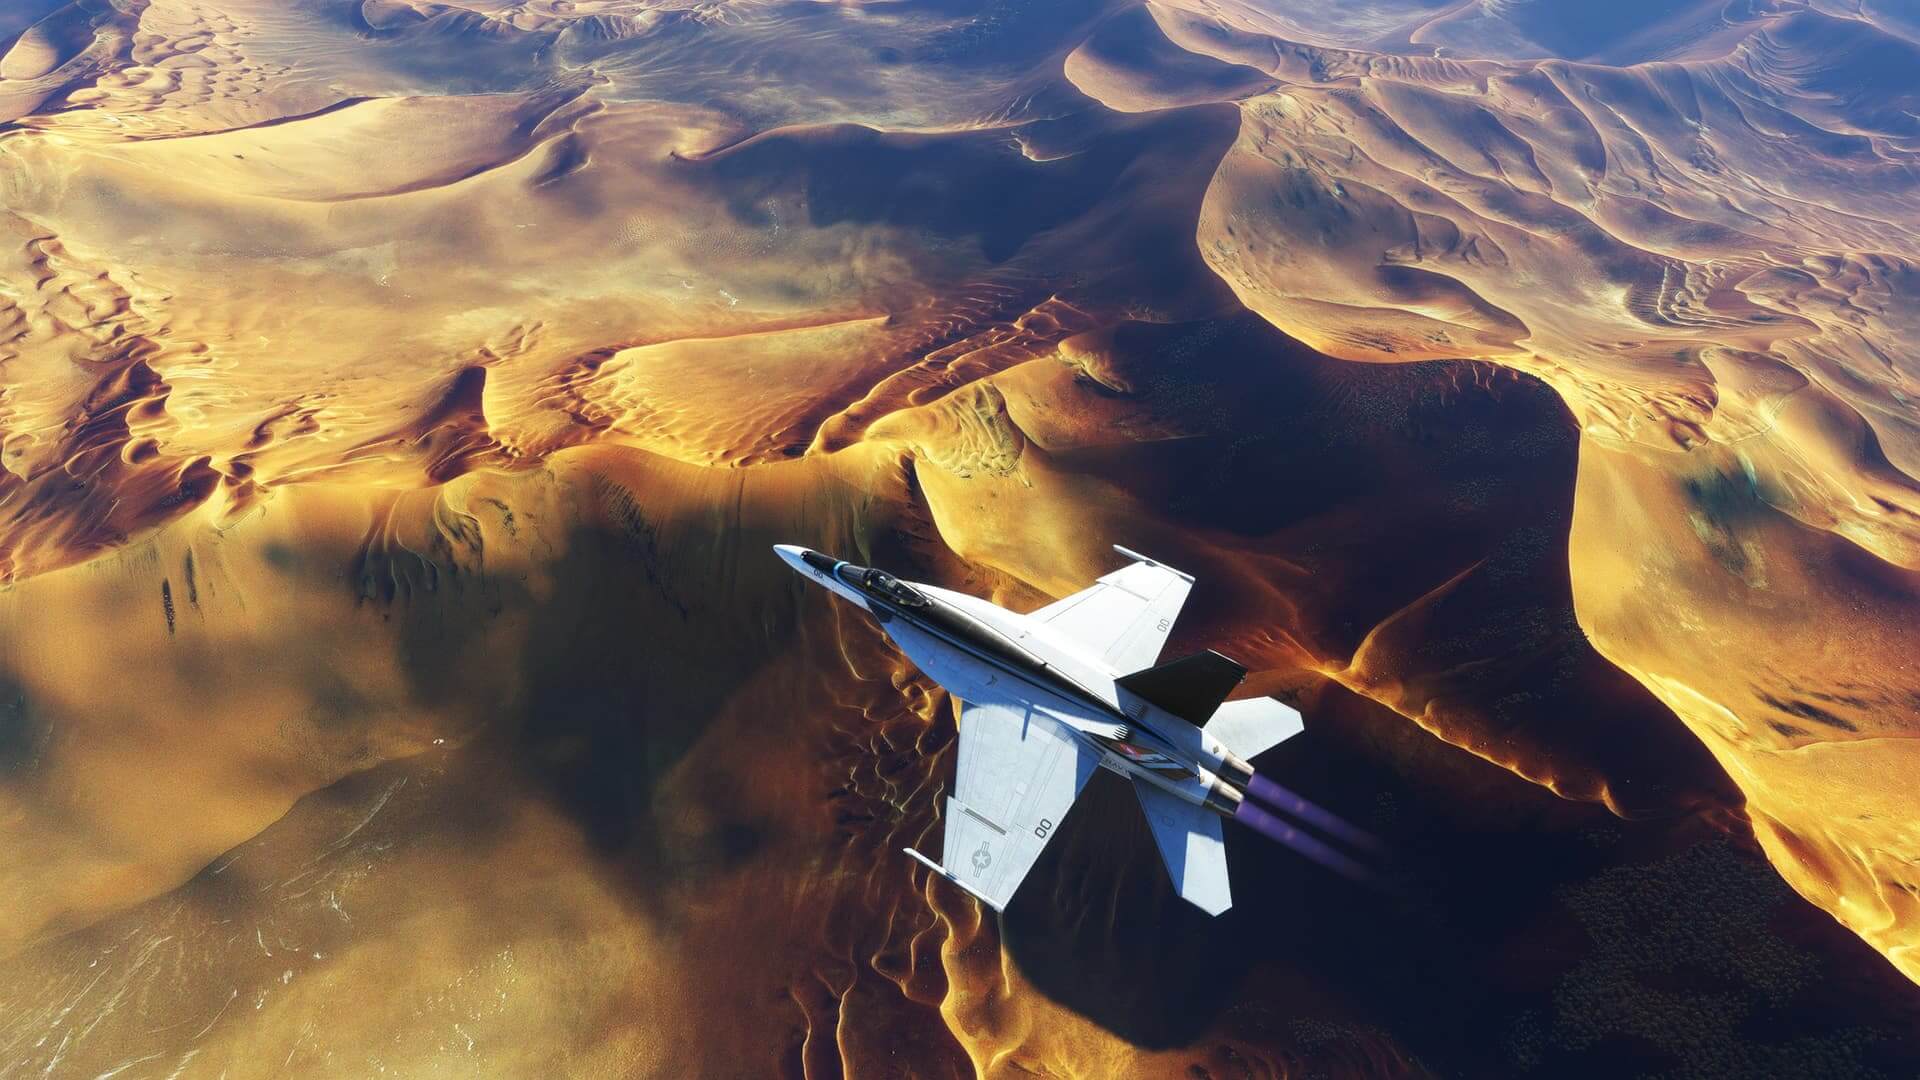 The F/A-18 Hornet in Maverick paint scheme cruises with afterburner engaged above the desert.